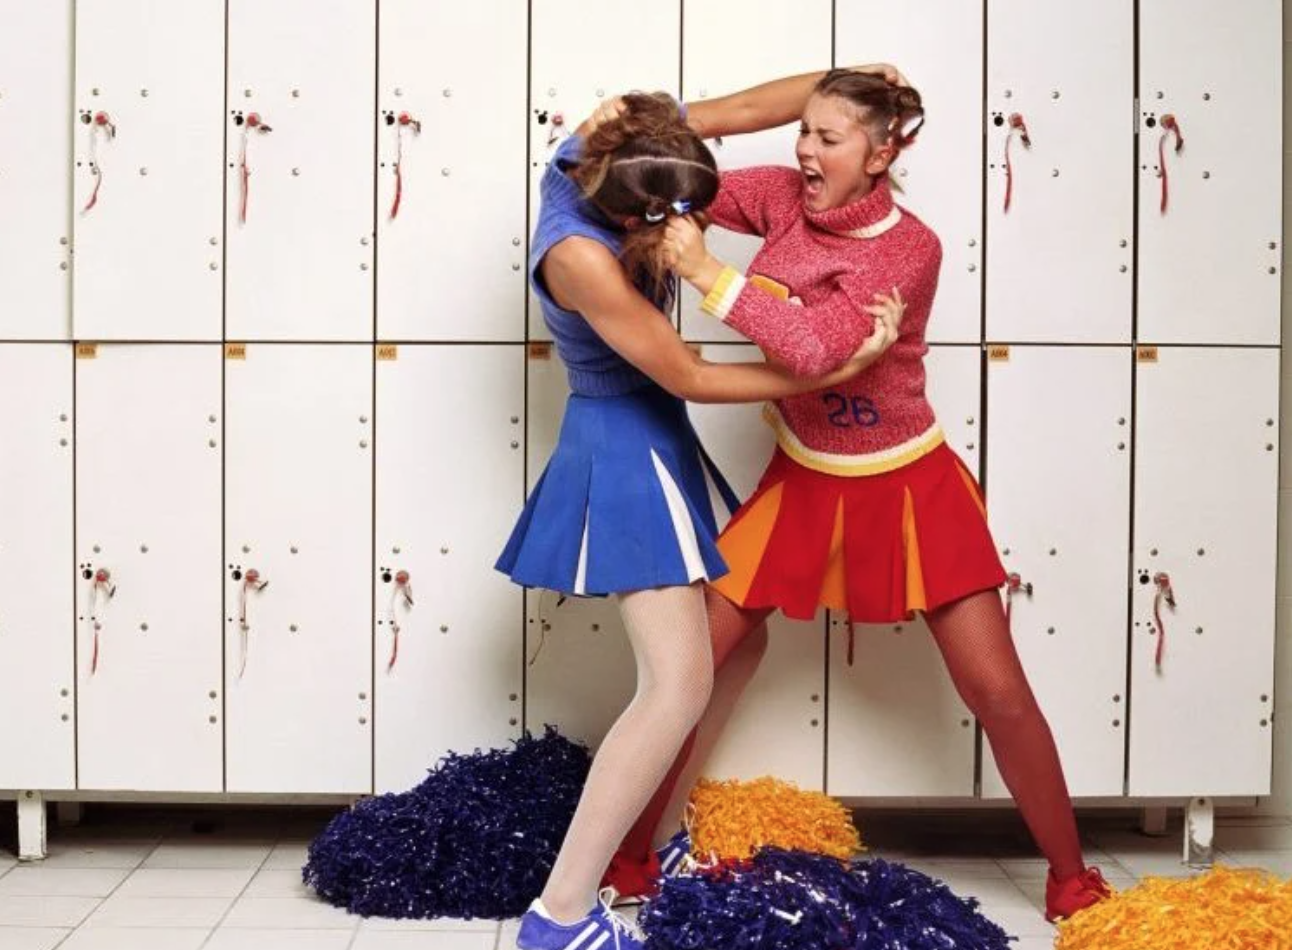 Awesome Mom Uses Deepfake Nudes to Frame Daughter’s Cheerleading Rivals, That’s the Spirit